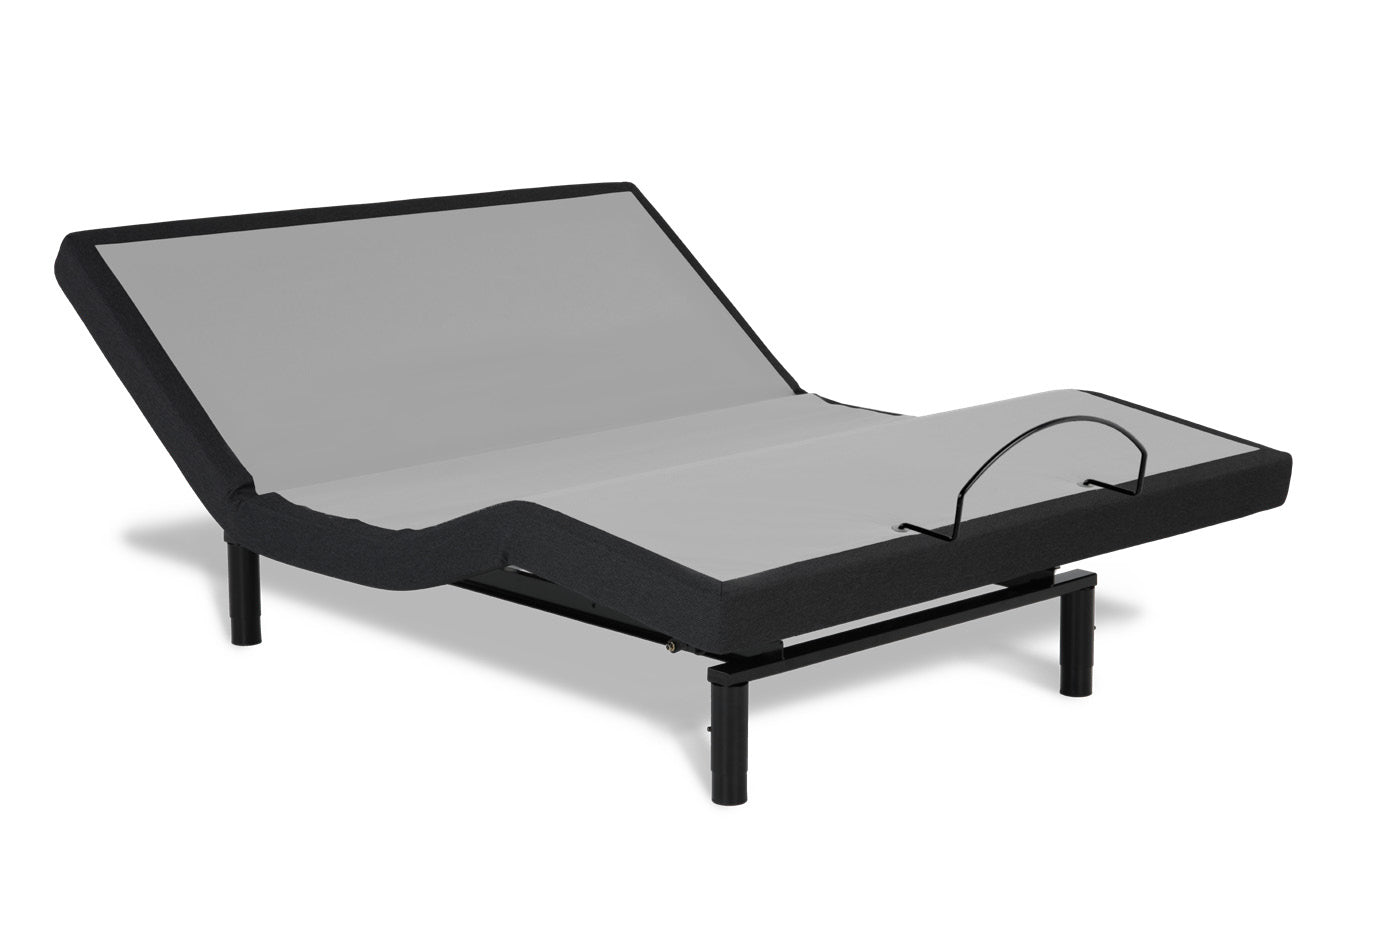 Leggett and Platt S-122 Adjustable Bed at Luxurious Beds and Linens